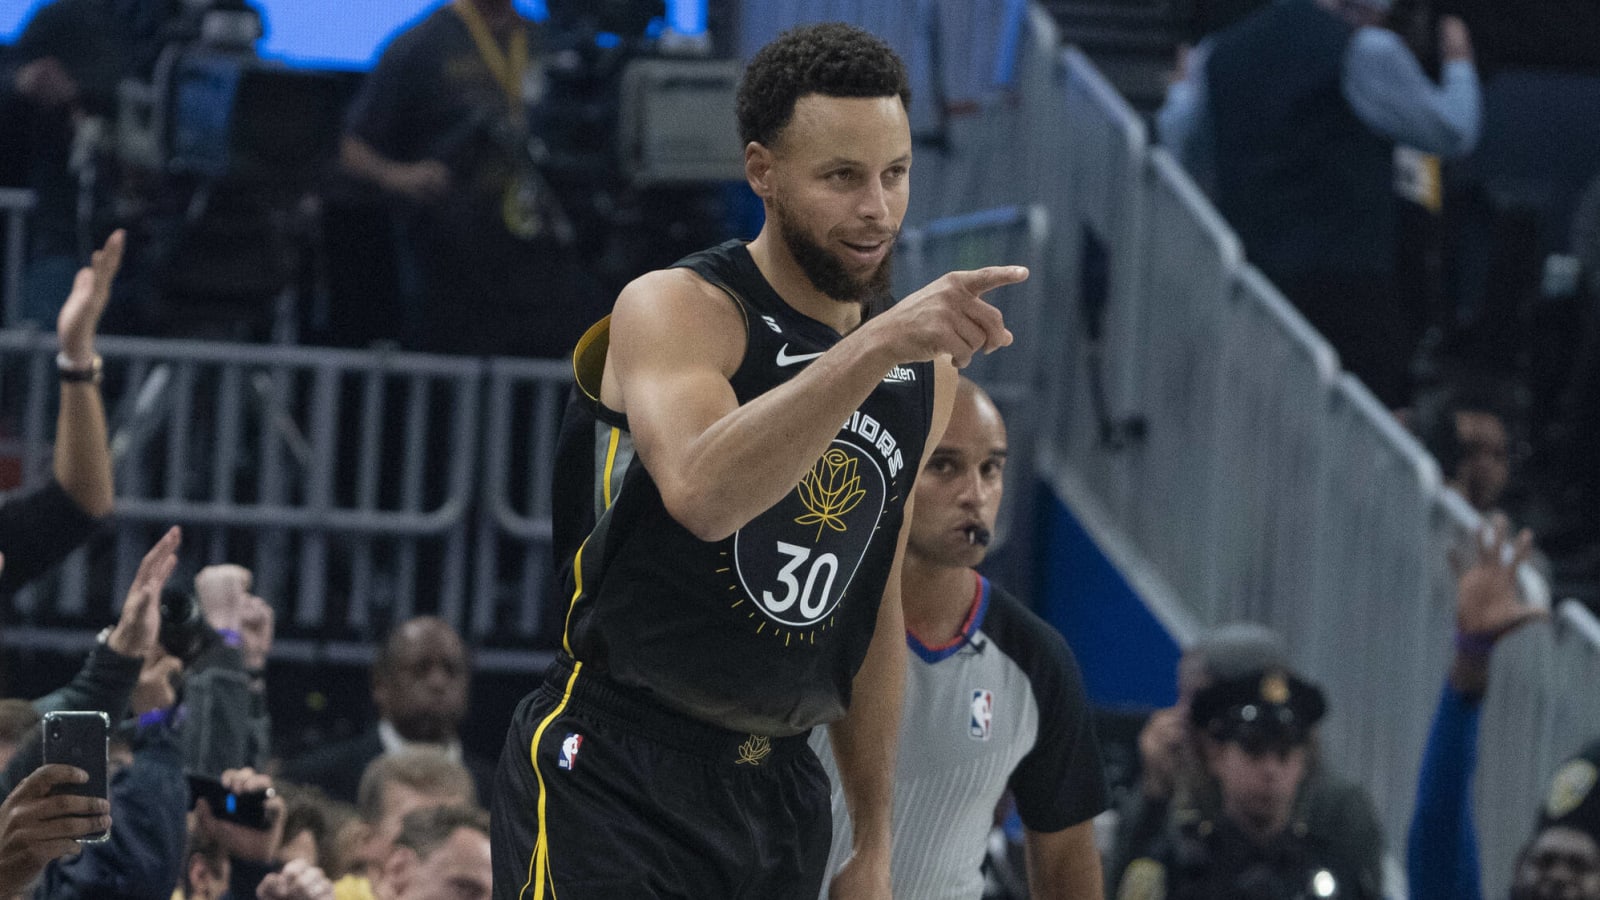 Watch: Steph Curry drills shot from beyond half court but it didn #39 t